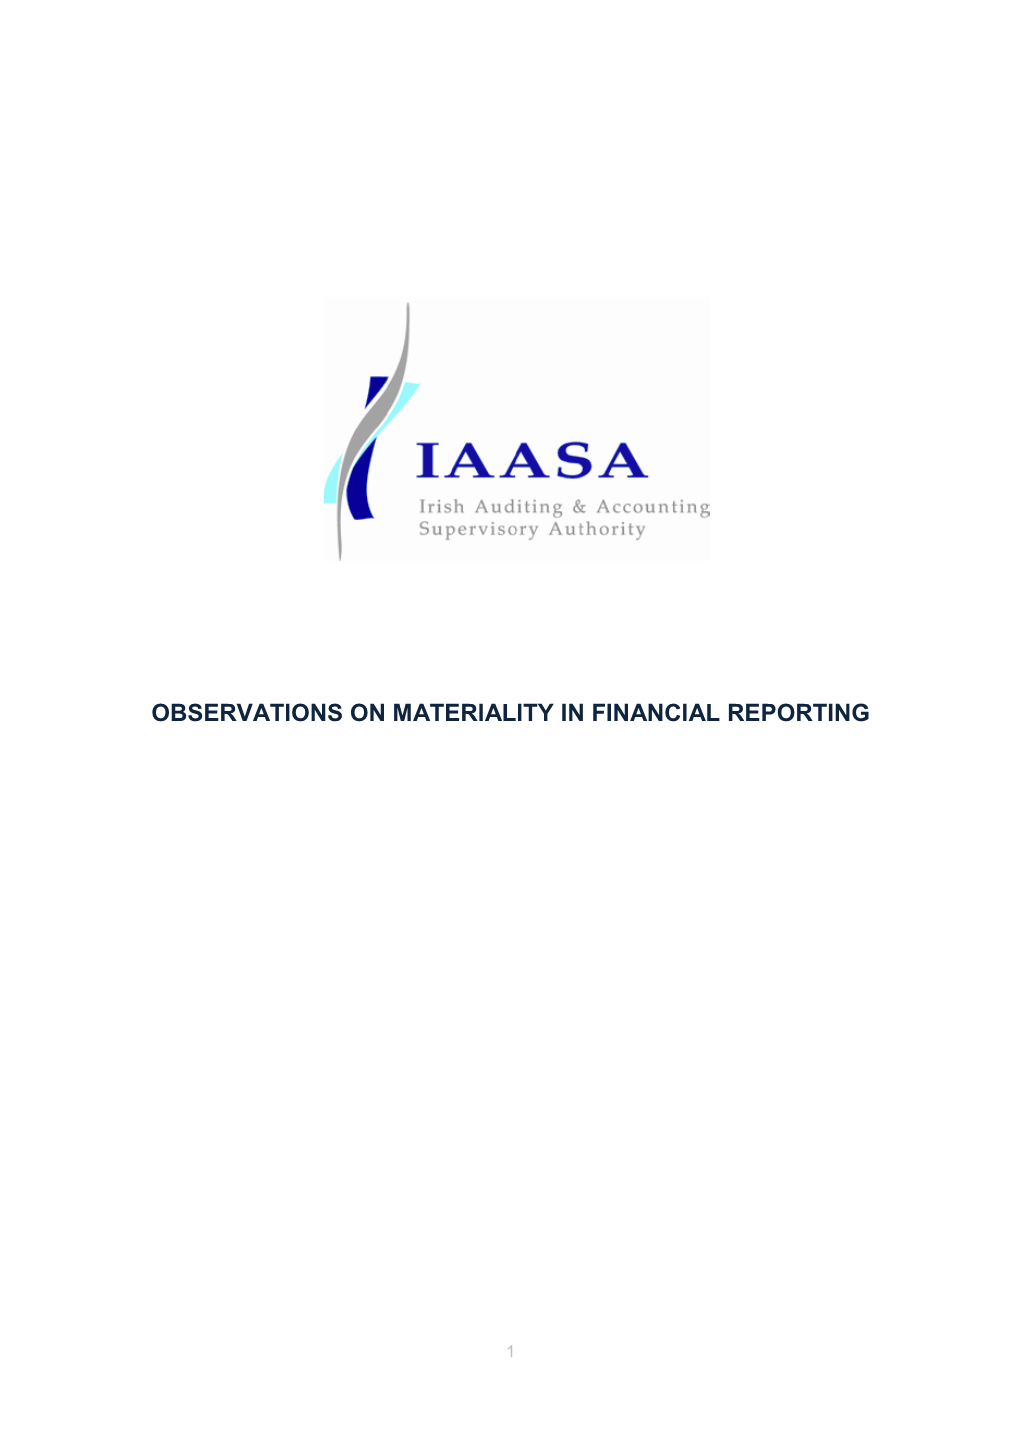 Observations on Materiality in Financial Reporting